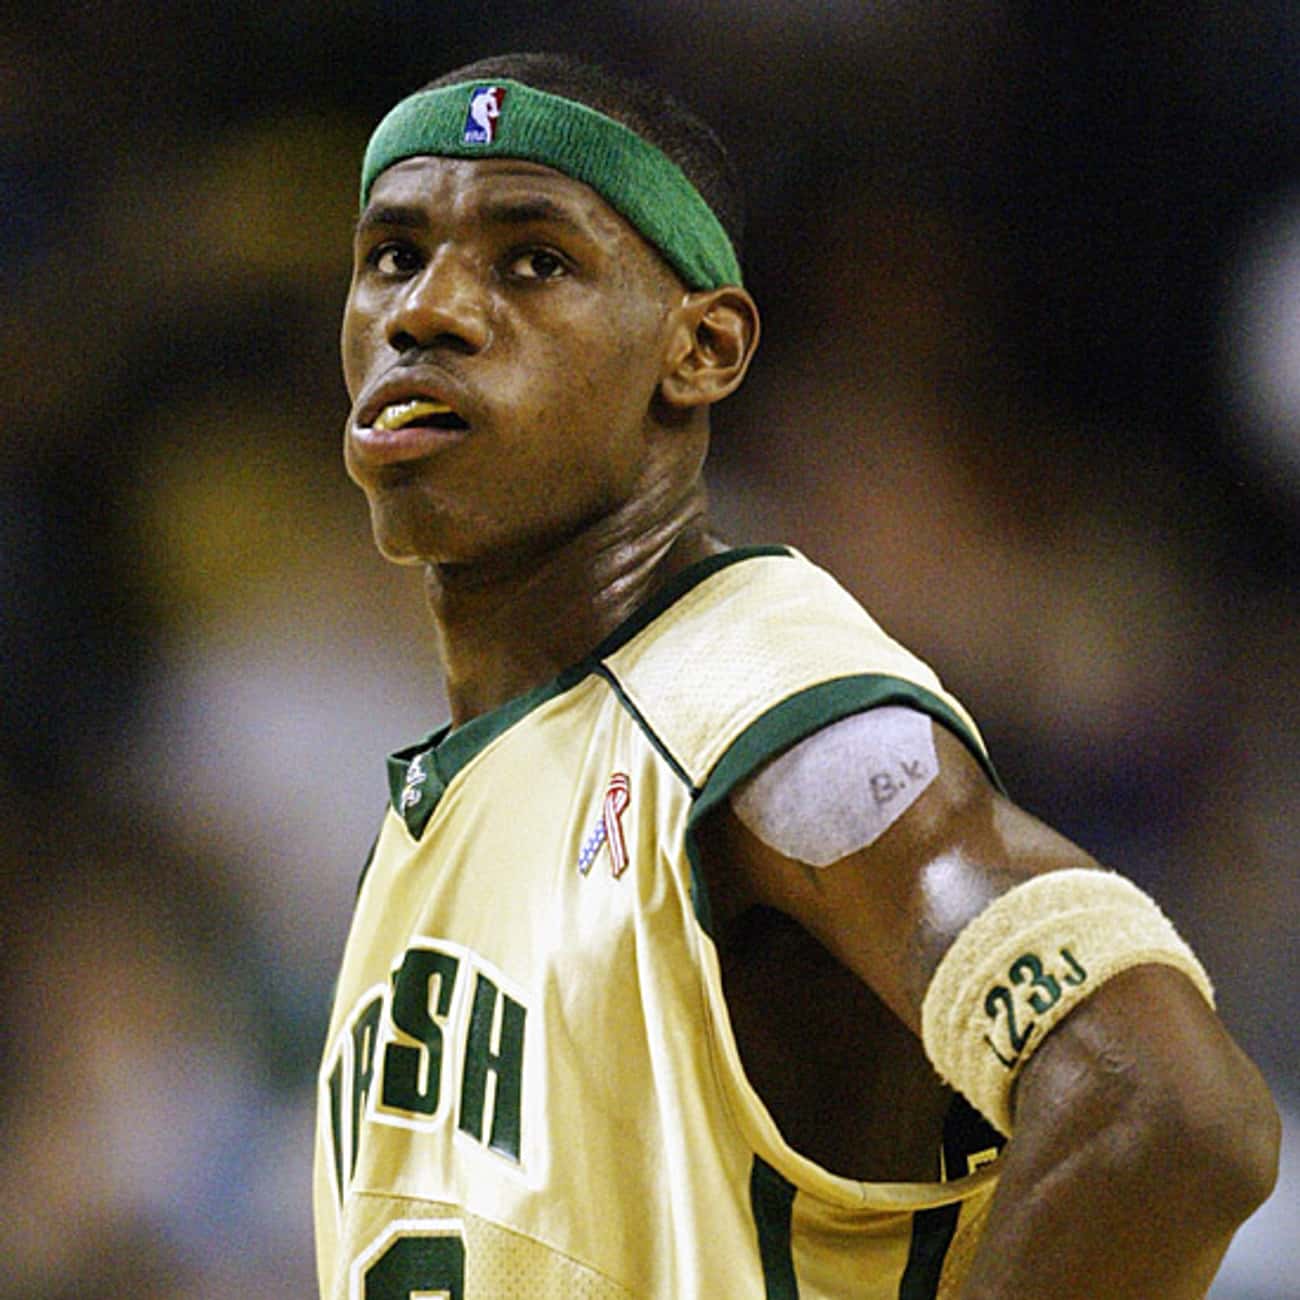 Young LeBron James in St. Mary's Basketball Jersey